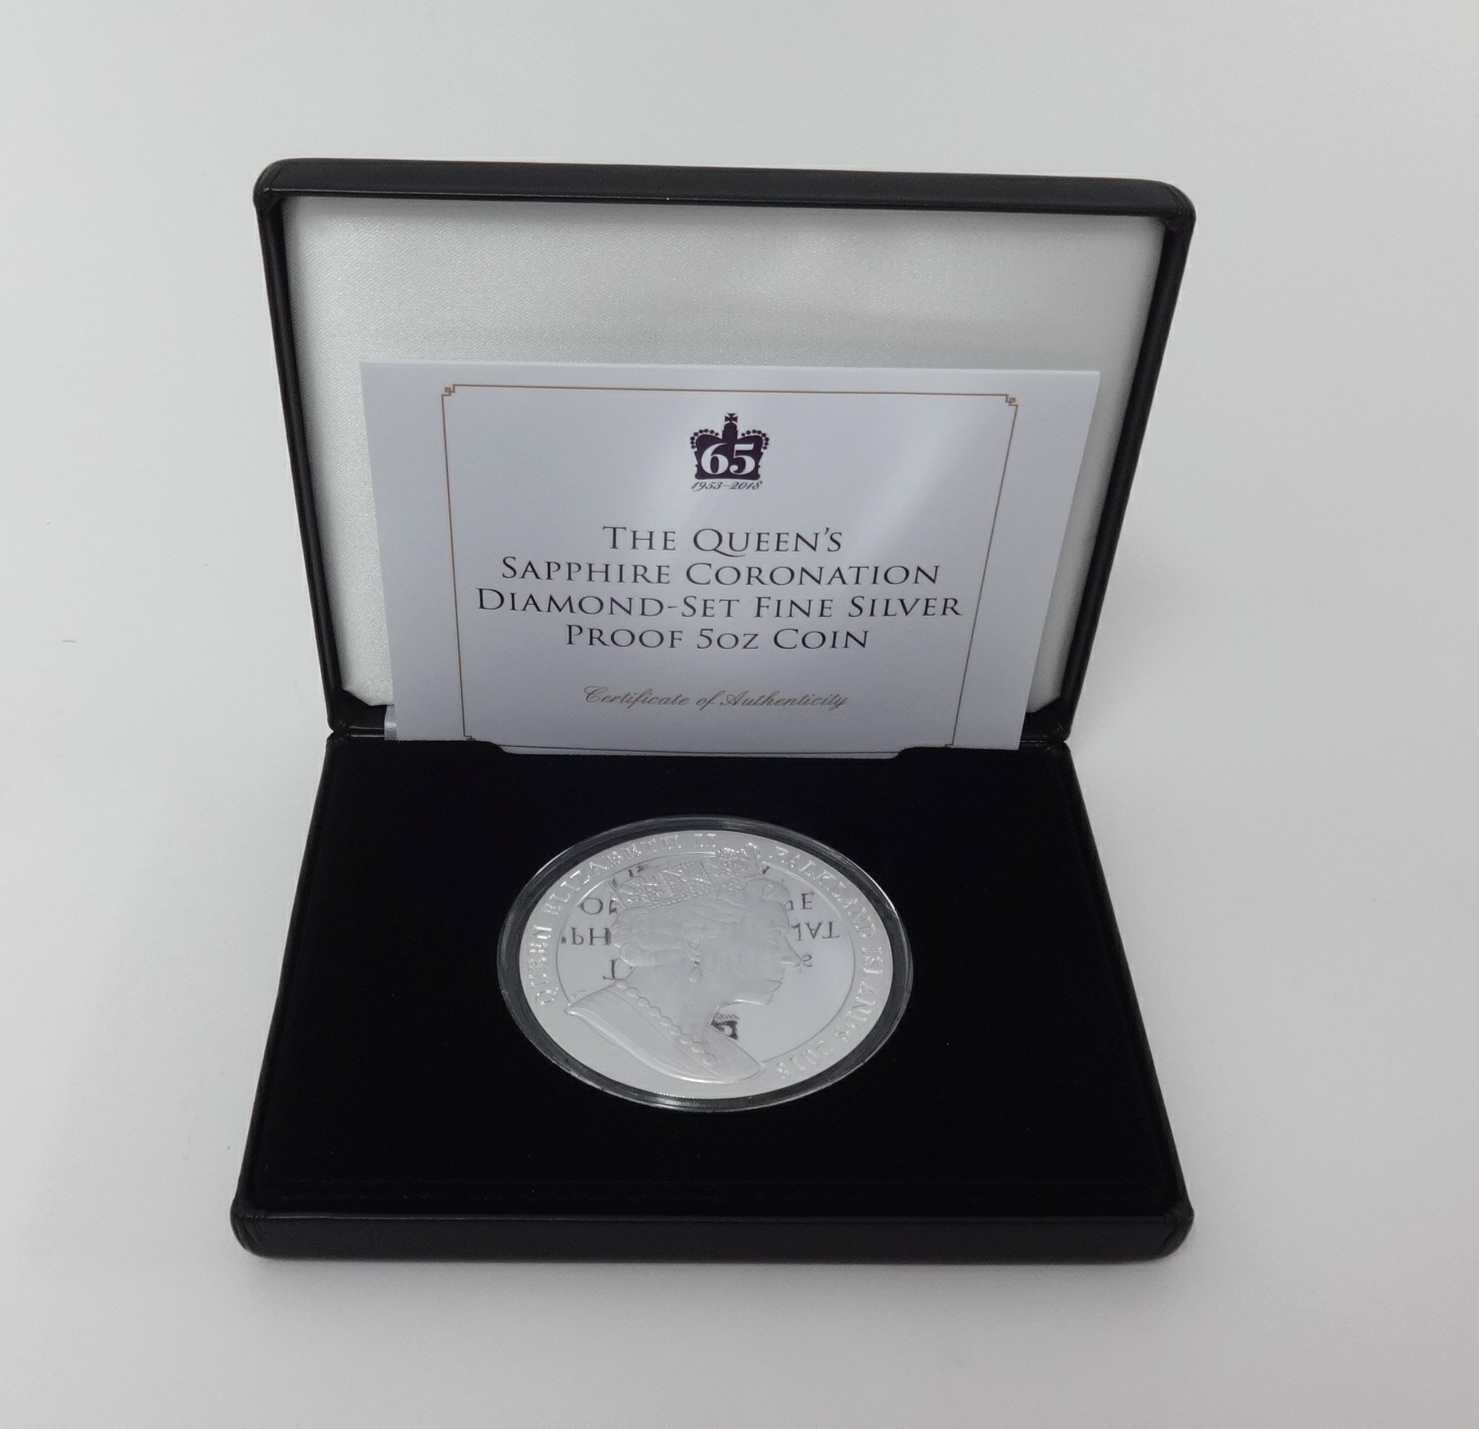 Jubilee Mint, 5oz silver proof coin Queens Sapphire Coronation 2018, boxed with certificate.